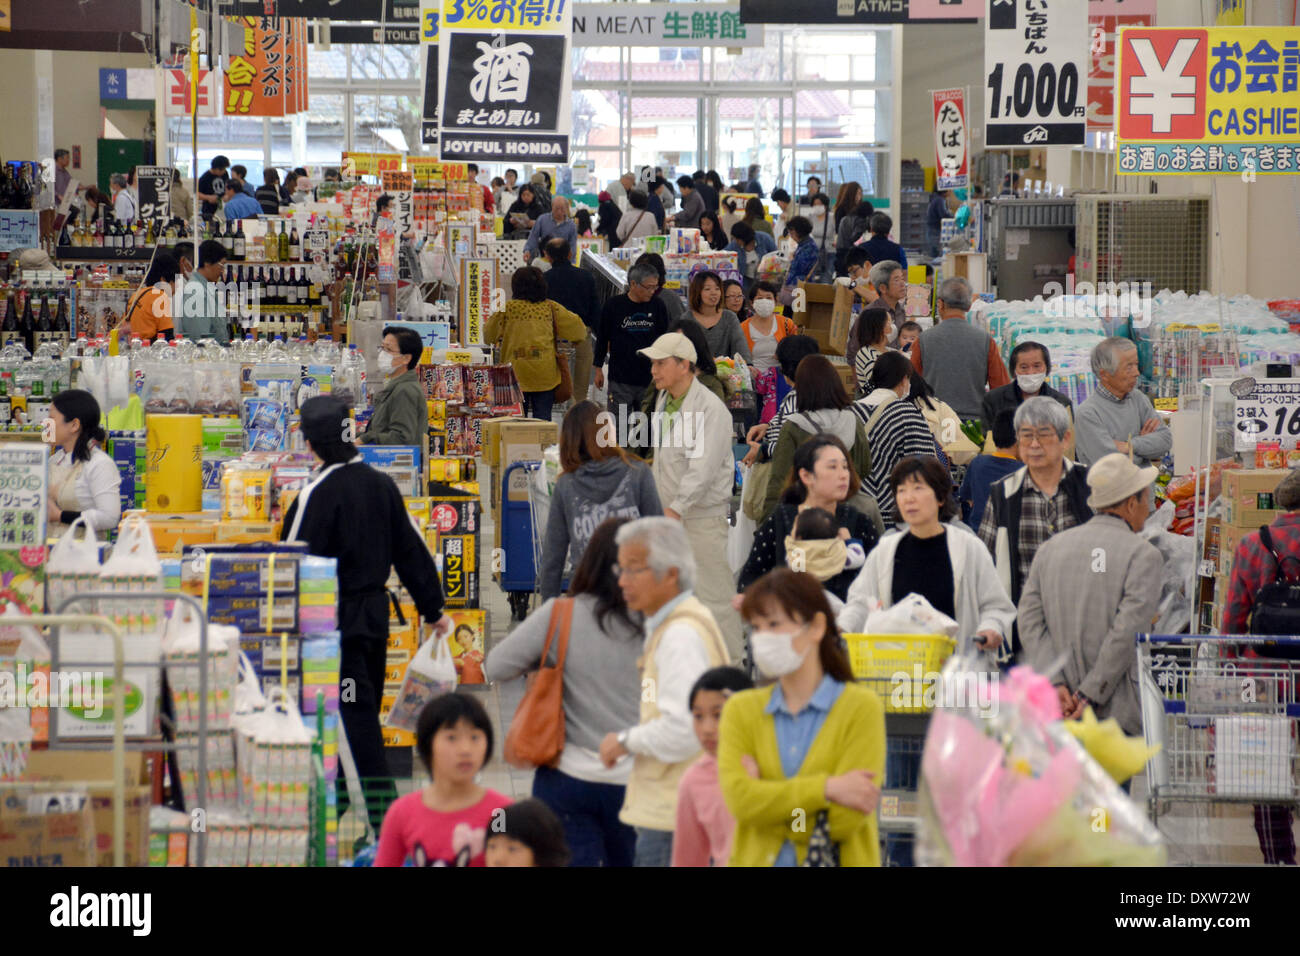 Tokyo, Japan. 31st Mar, 2014. Shoppers stampede for merchandise at a Tokyo's suburban home center on Monday, March 31. 2014, before the government levies the sales tax from the current 5% to 8% on April 1 as the country braces for its first tax hike in years.The last time Japan brought in a higher levy in 1997, it was followed by years of deflation and tepid economic growth. © Natsuki Sakai/AFLO/Alamy Live News Stock Photo